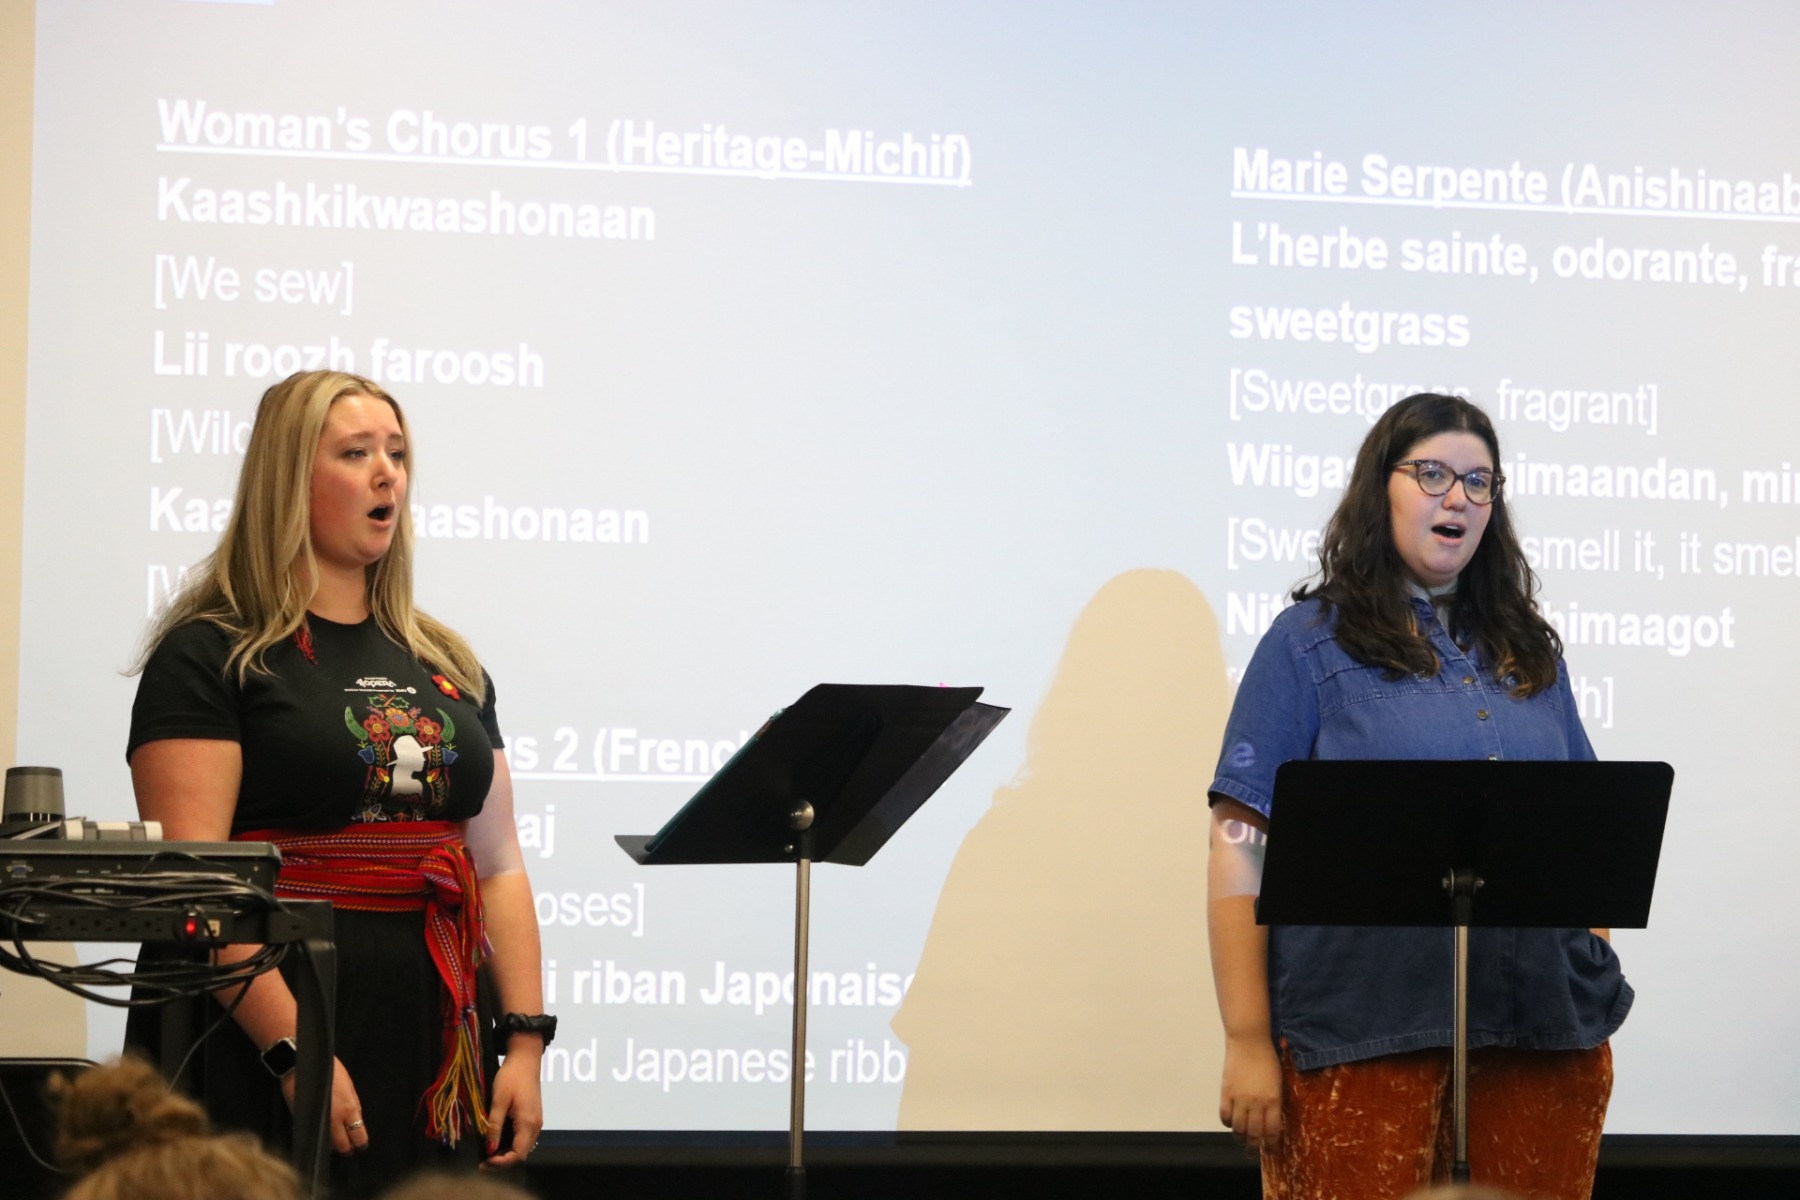 Desautels alumnae Camryn Dewar (left) and Keely McPeek (right) perform a sneak peek of Li Keur: Riel's Heart of the North, for Desautels Faculty of Music students.